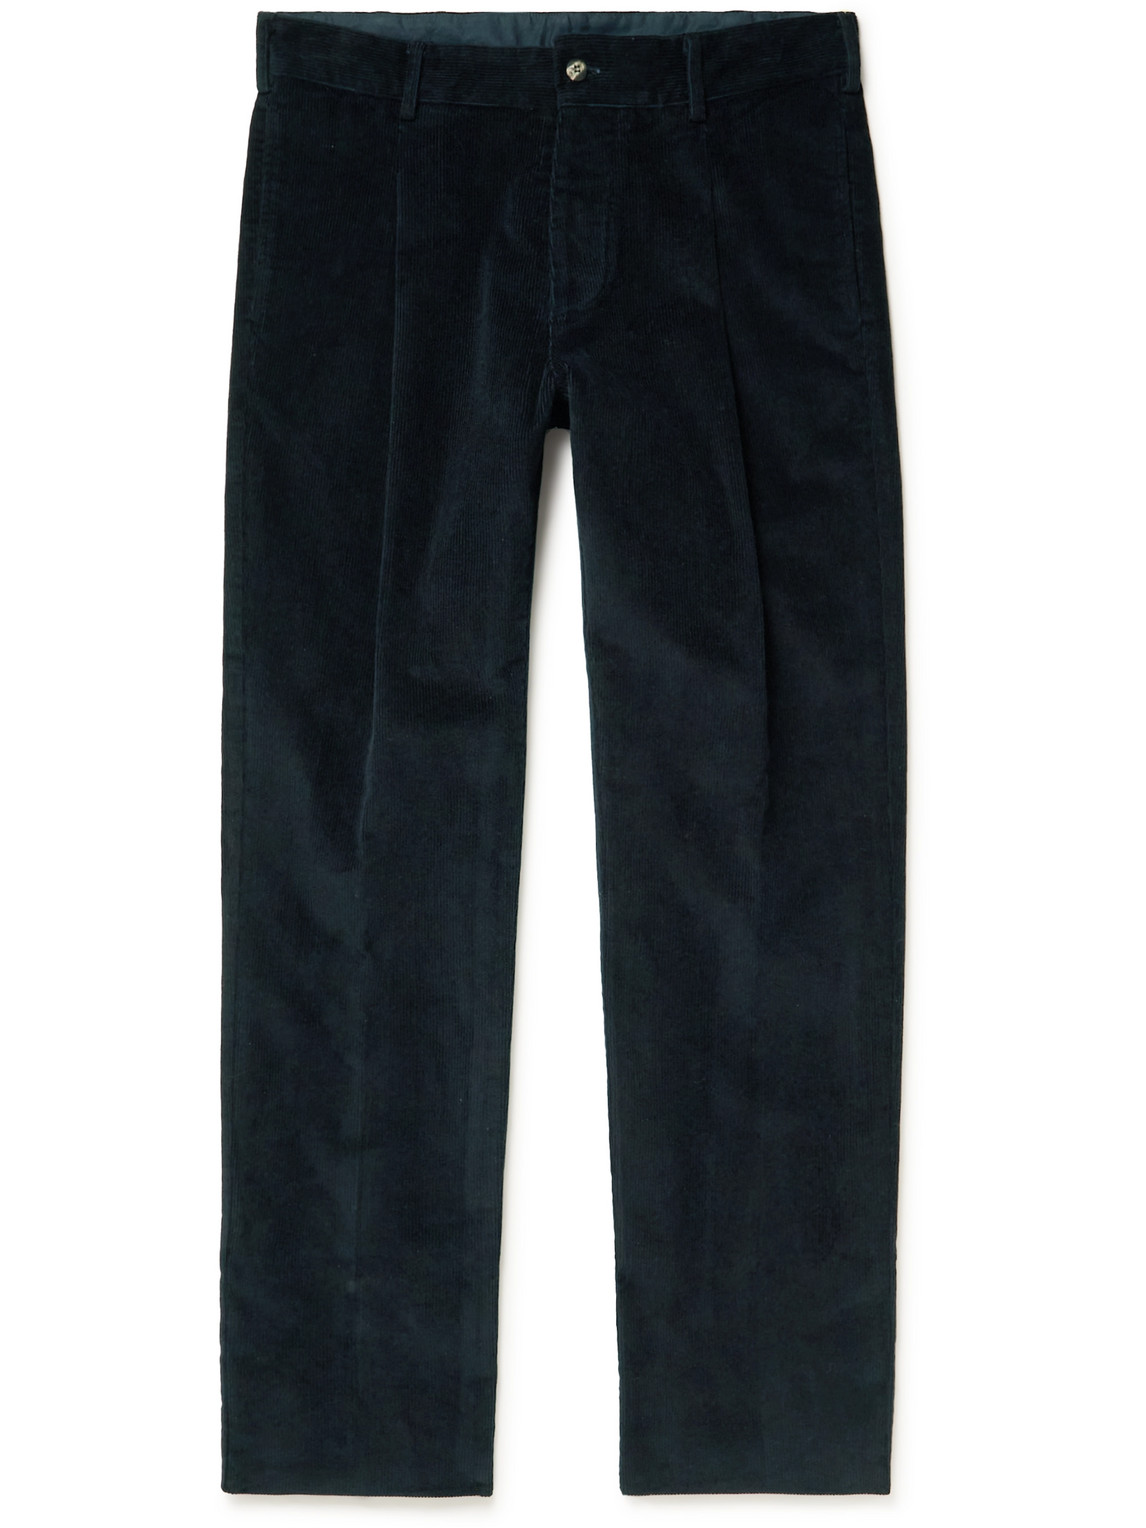 DOPPIAA Aantioco Tapered Pleated Stretch Cotton-Corduroy Trousers